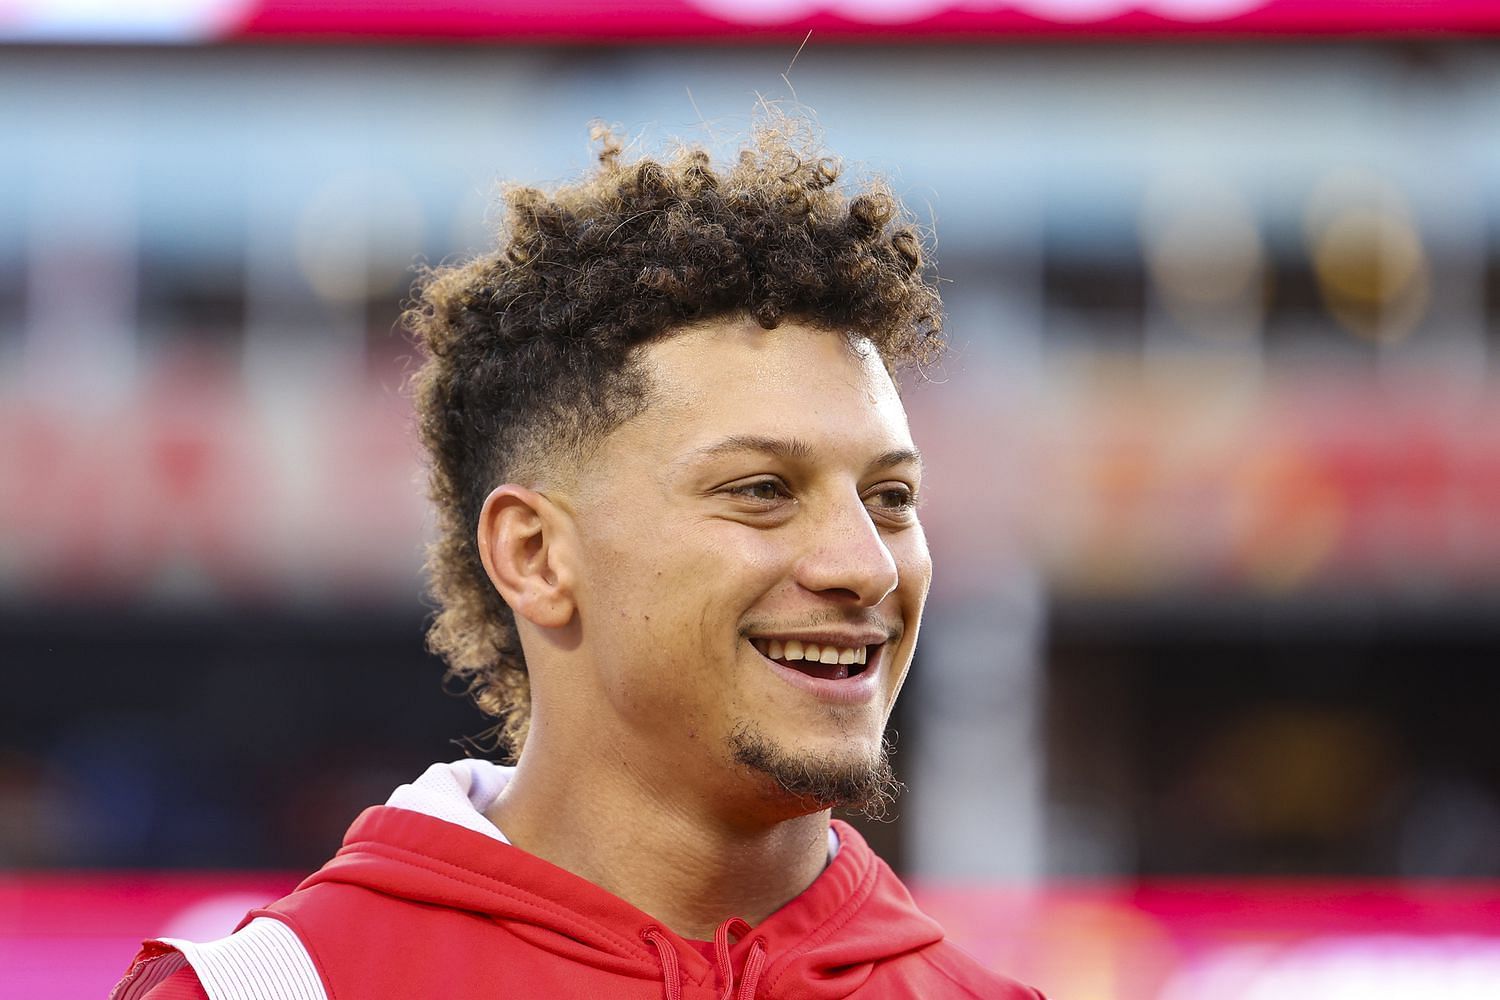 What is Patrick Mahomes